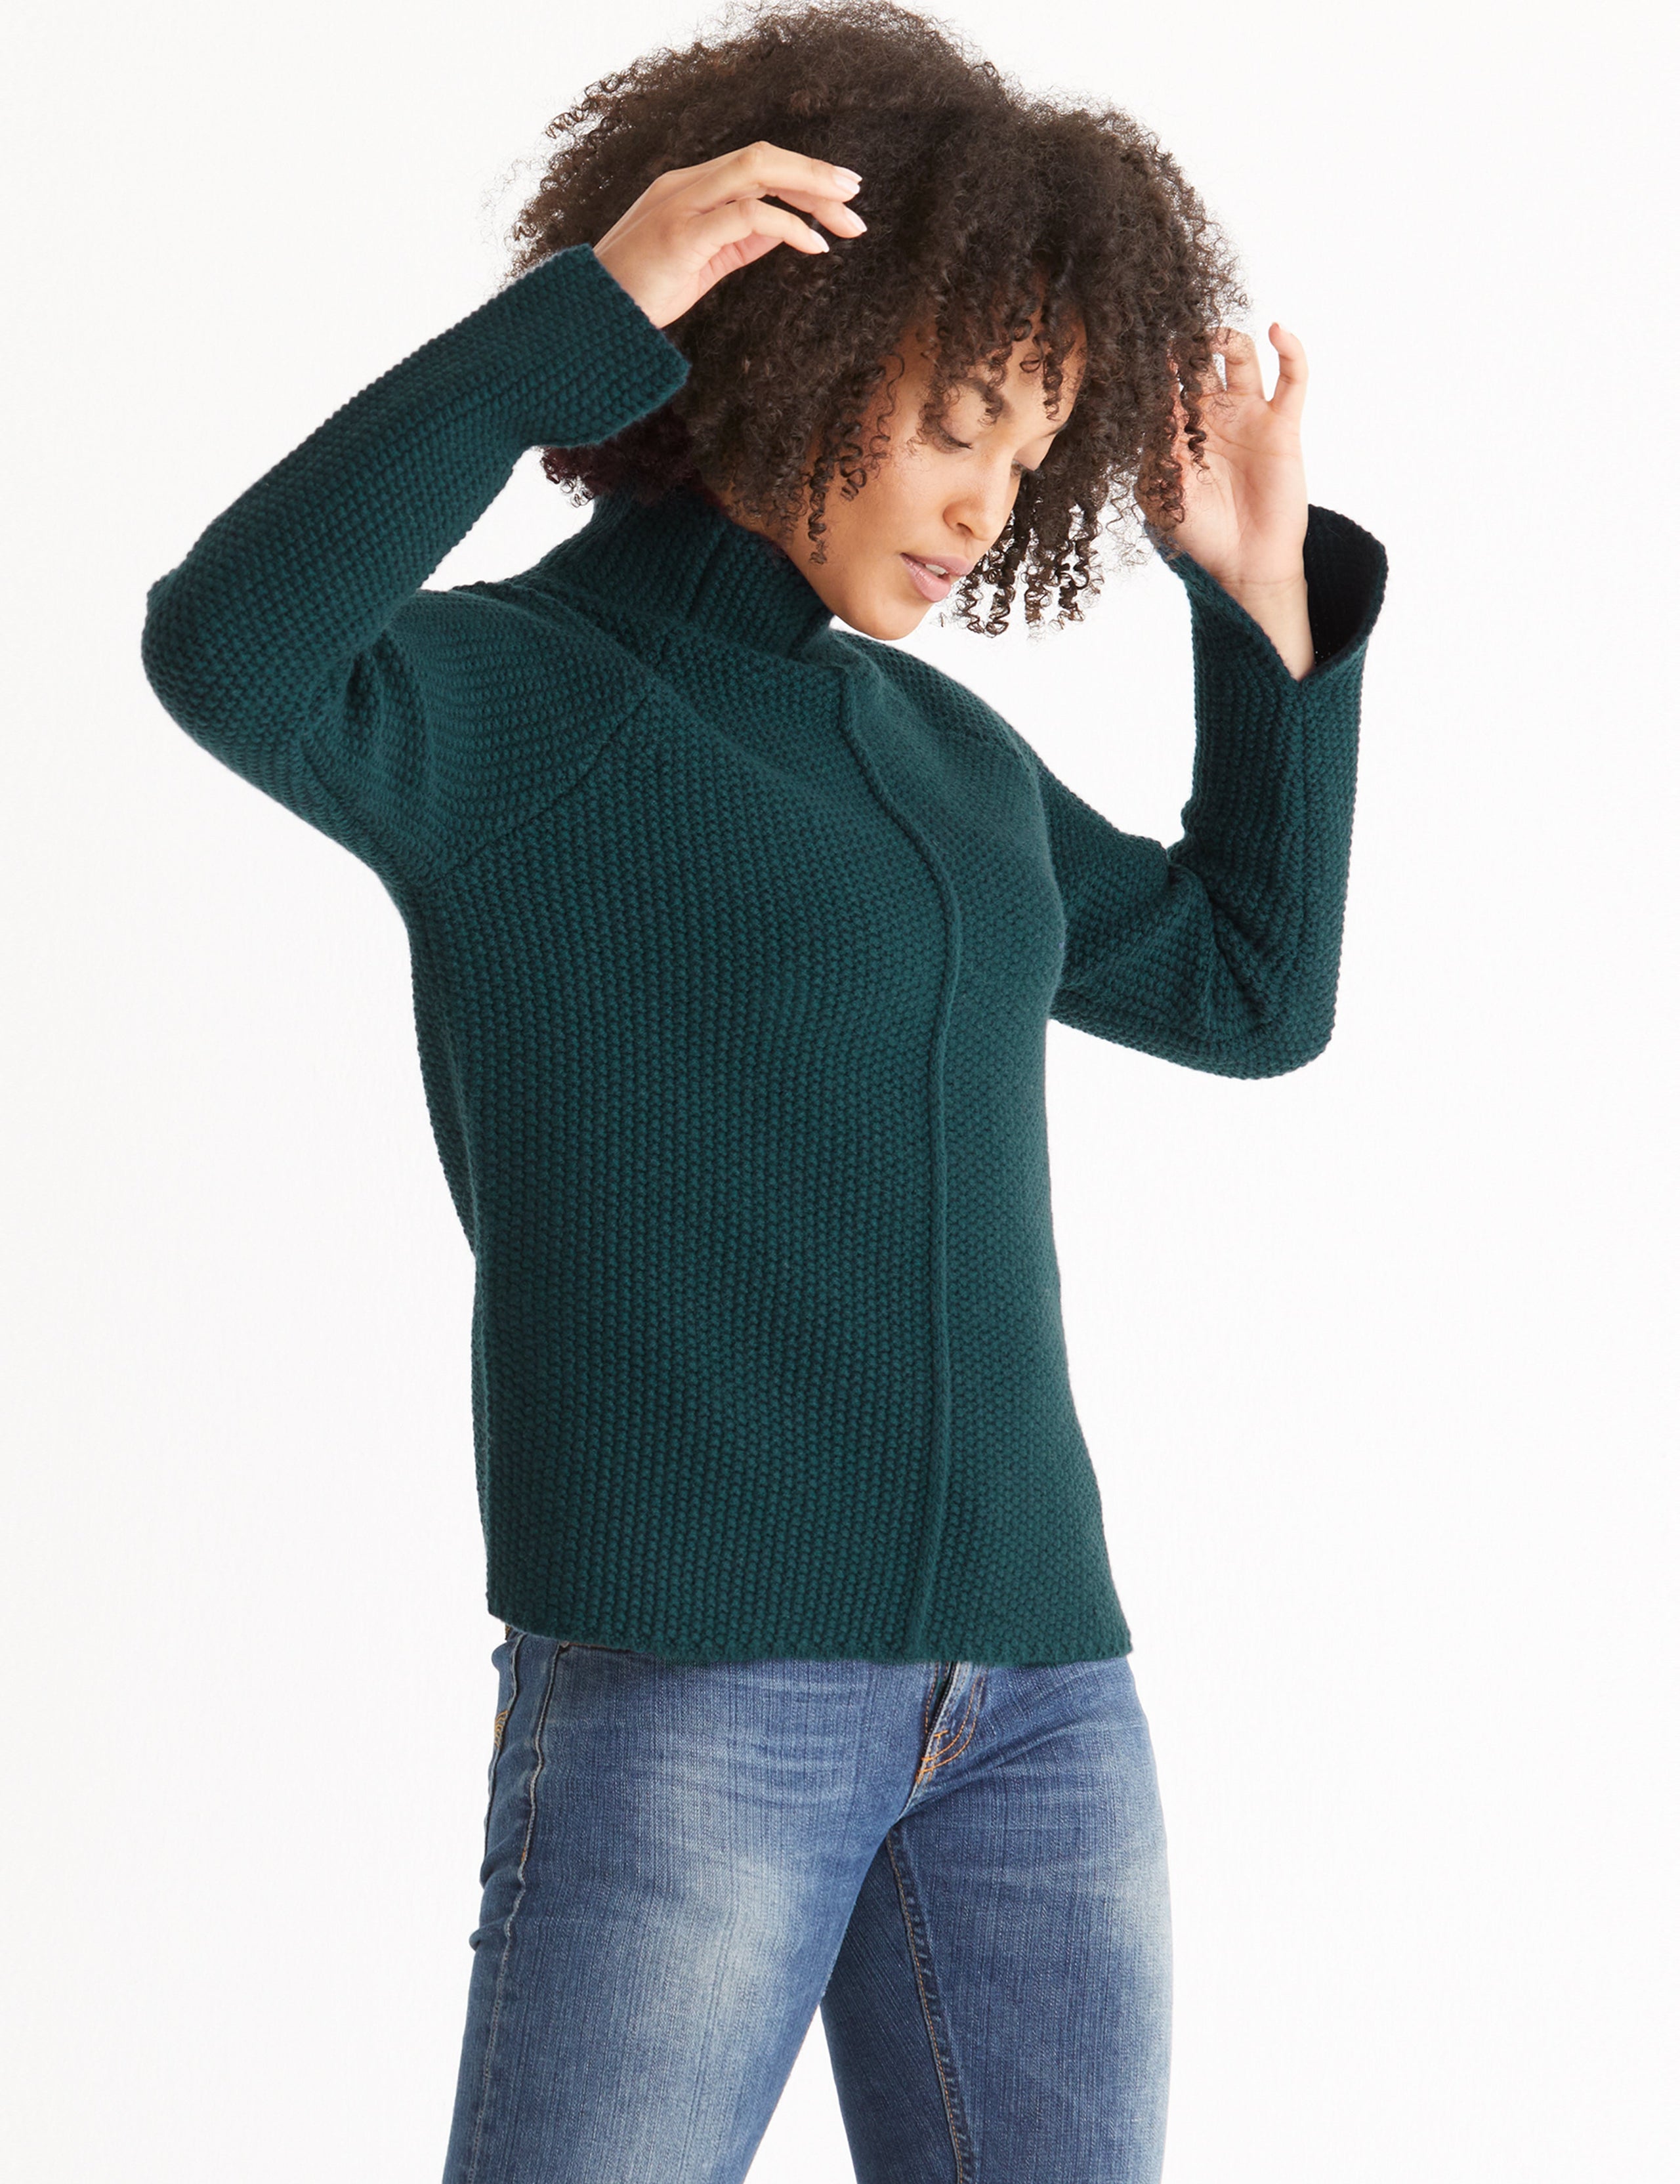 green sweater for women from Aether Apparel